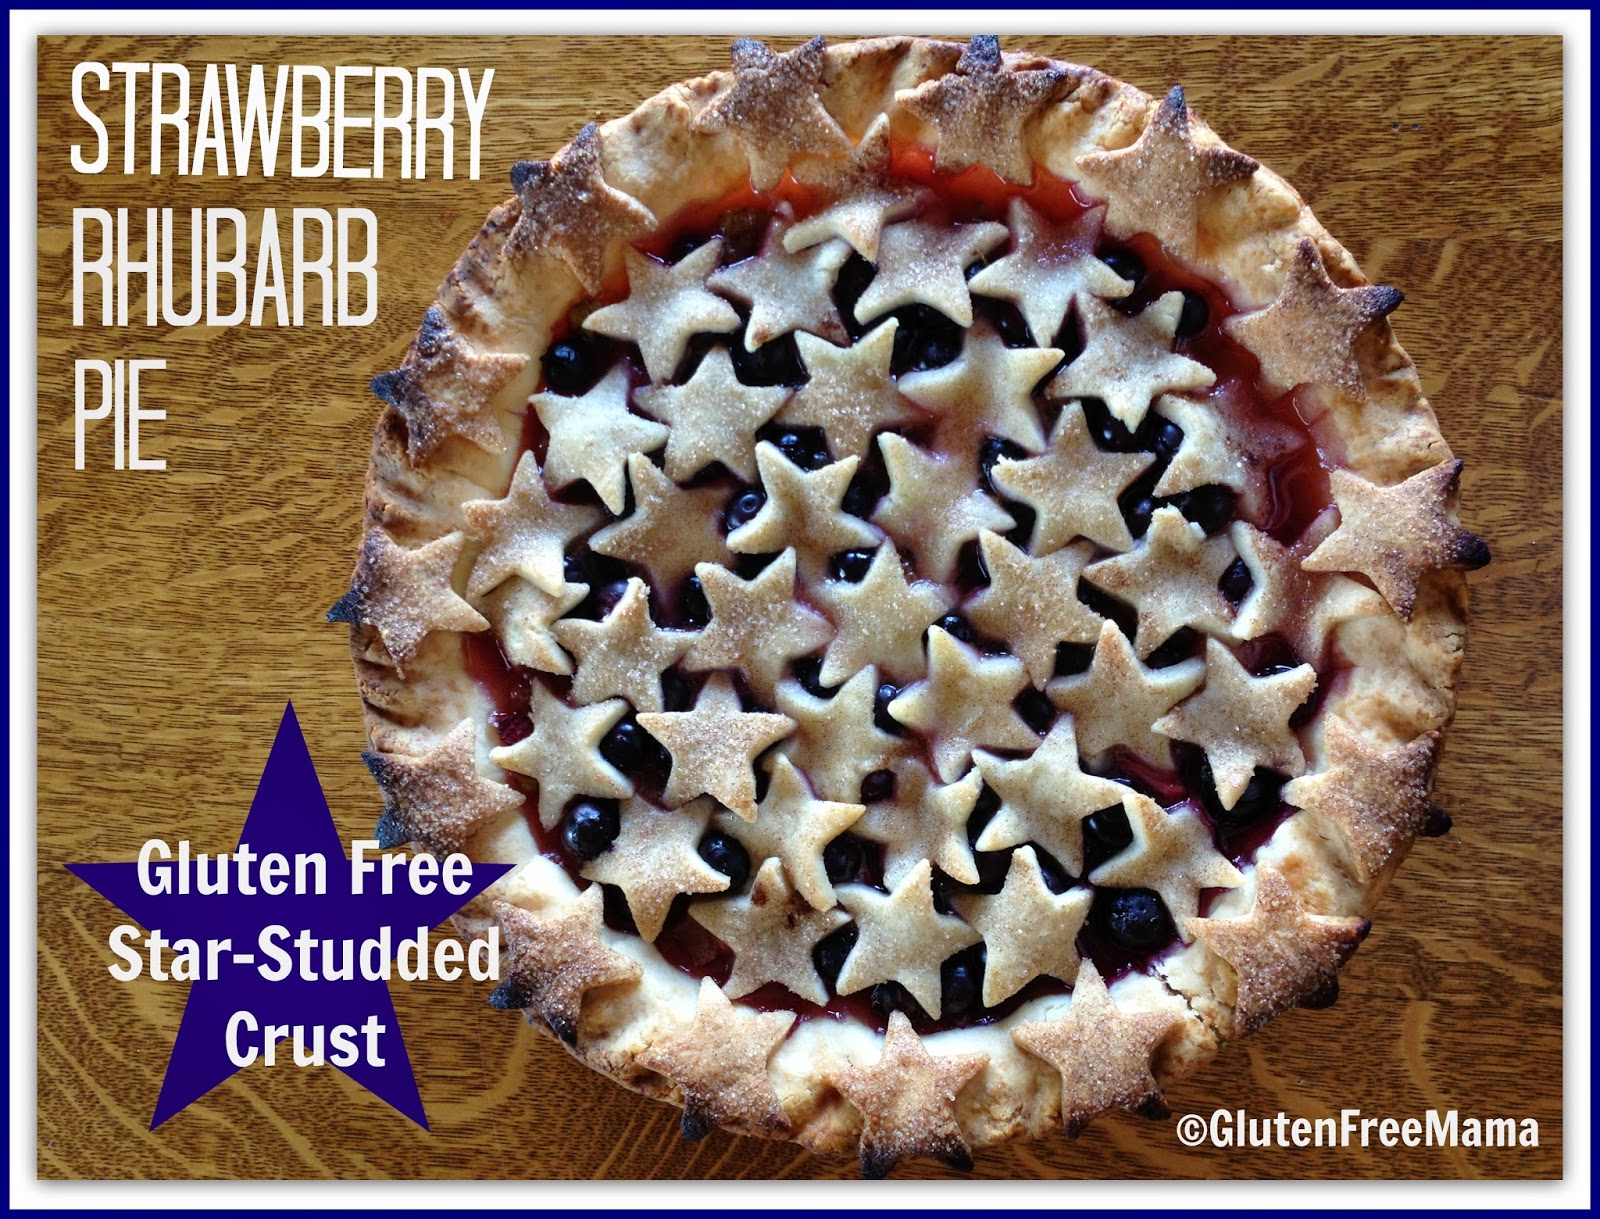 Gluten Free Strawberry Rhubarb Pie with Blueberries and Star-studded Crust!